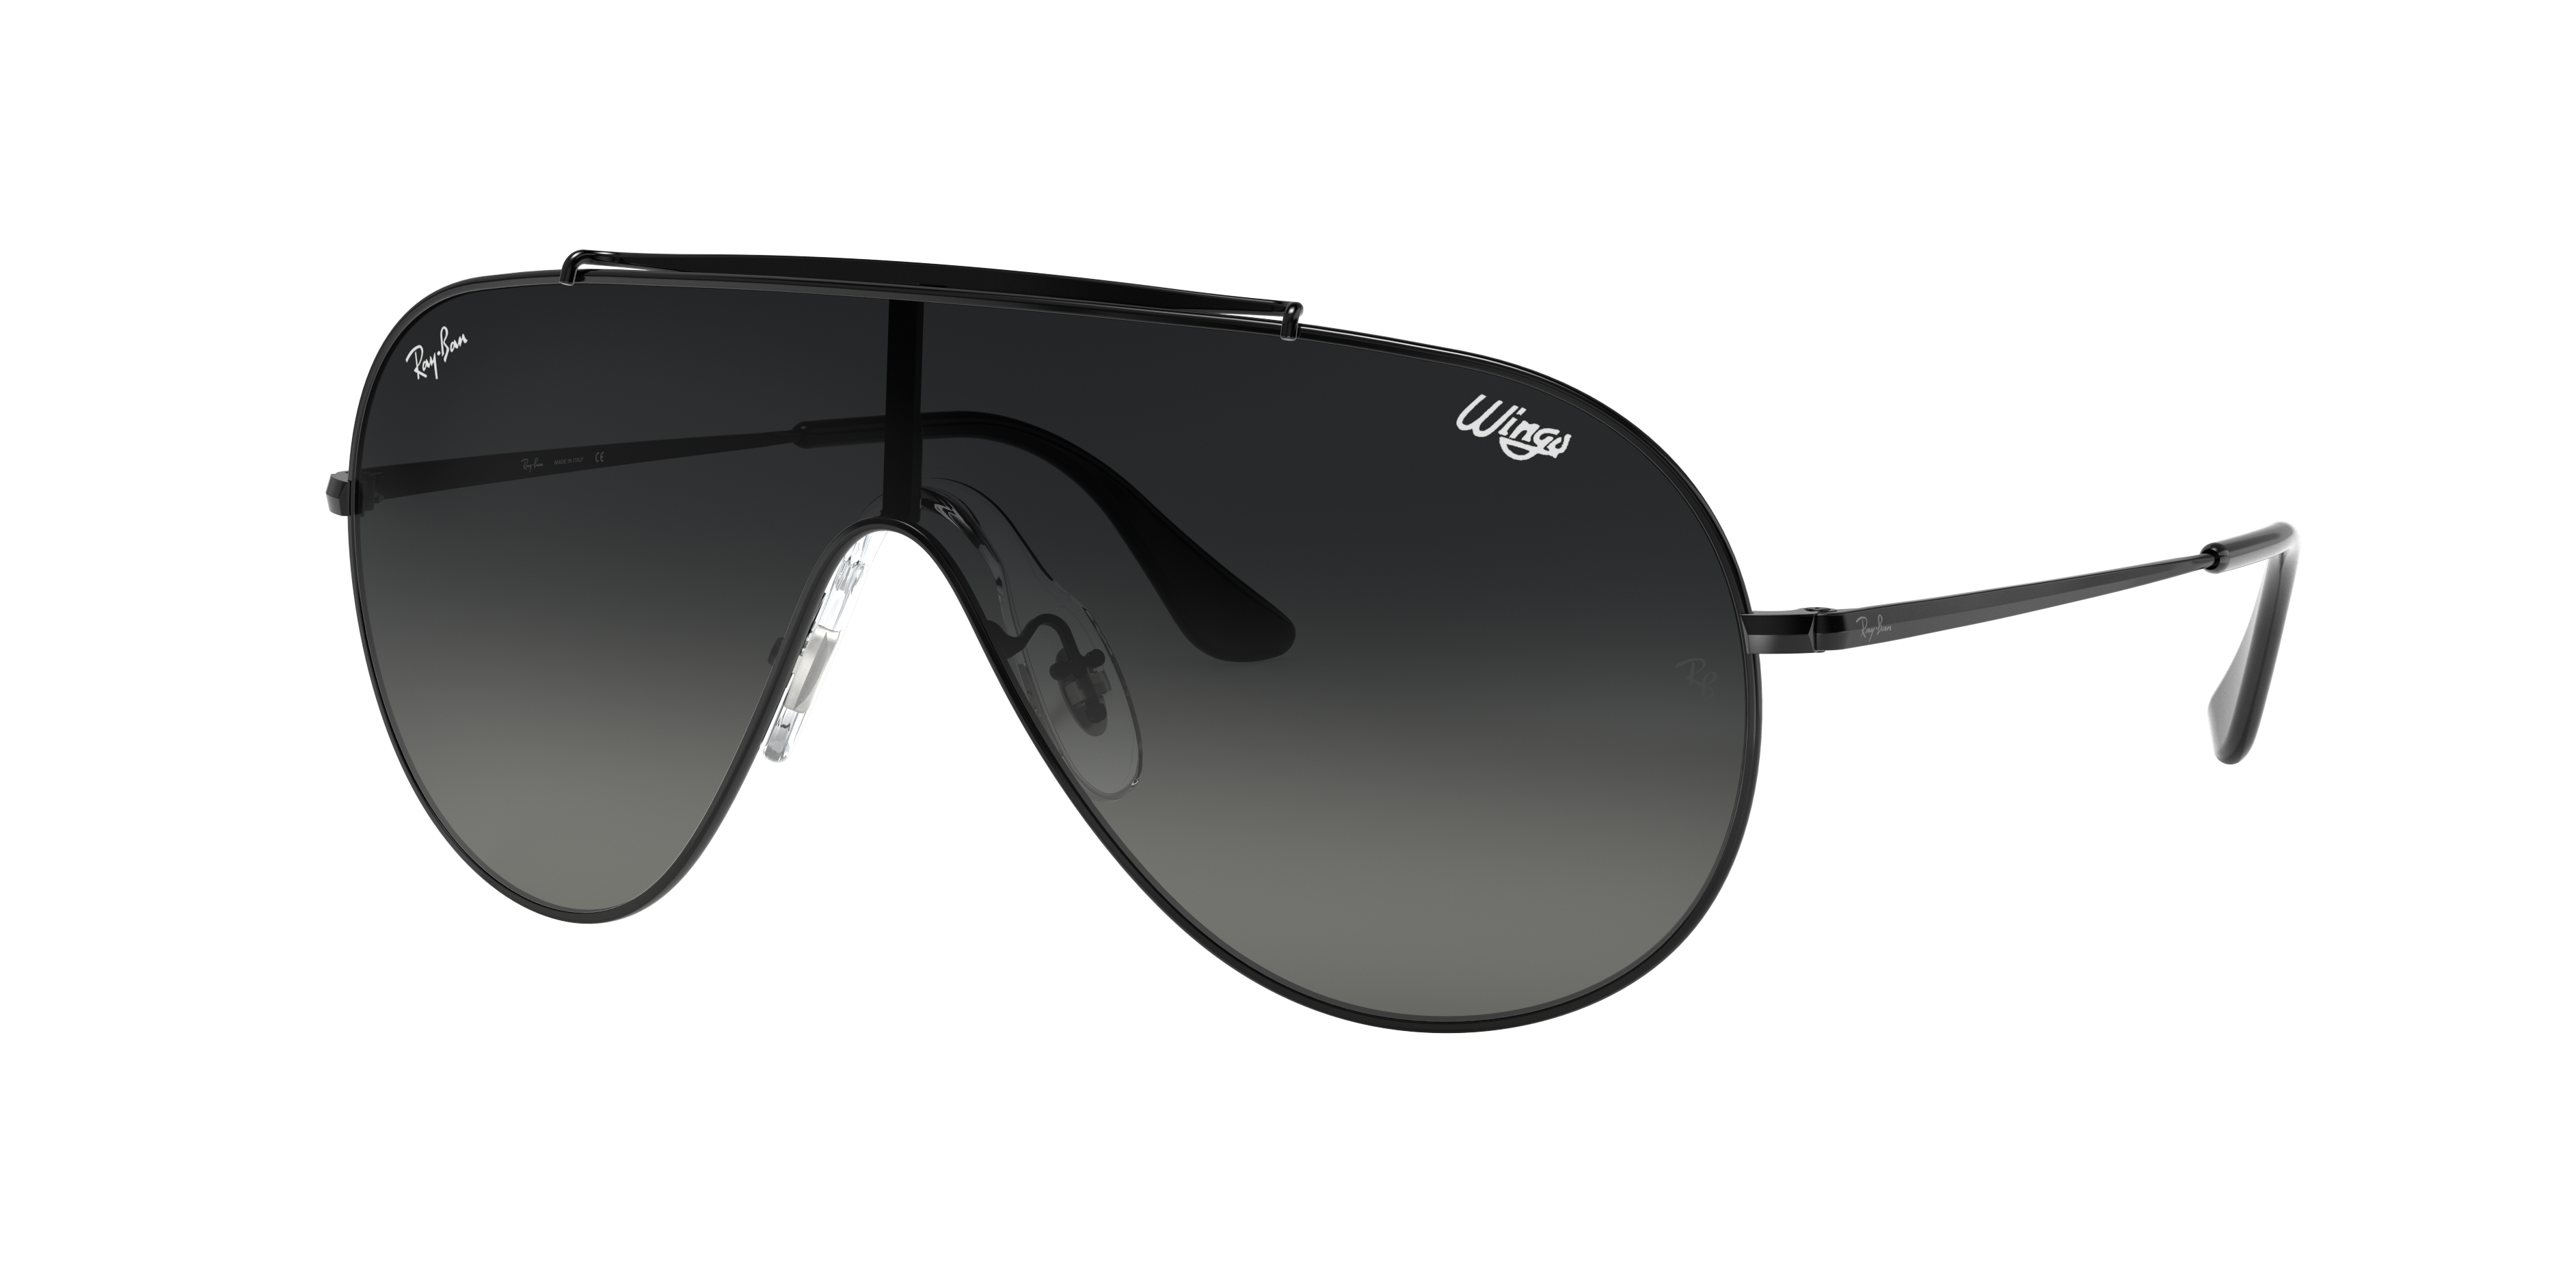 Wings Sunglasses in Black and Grey | Ray-Ban®